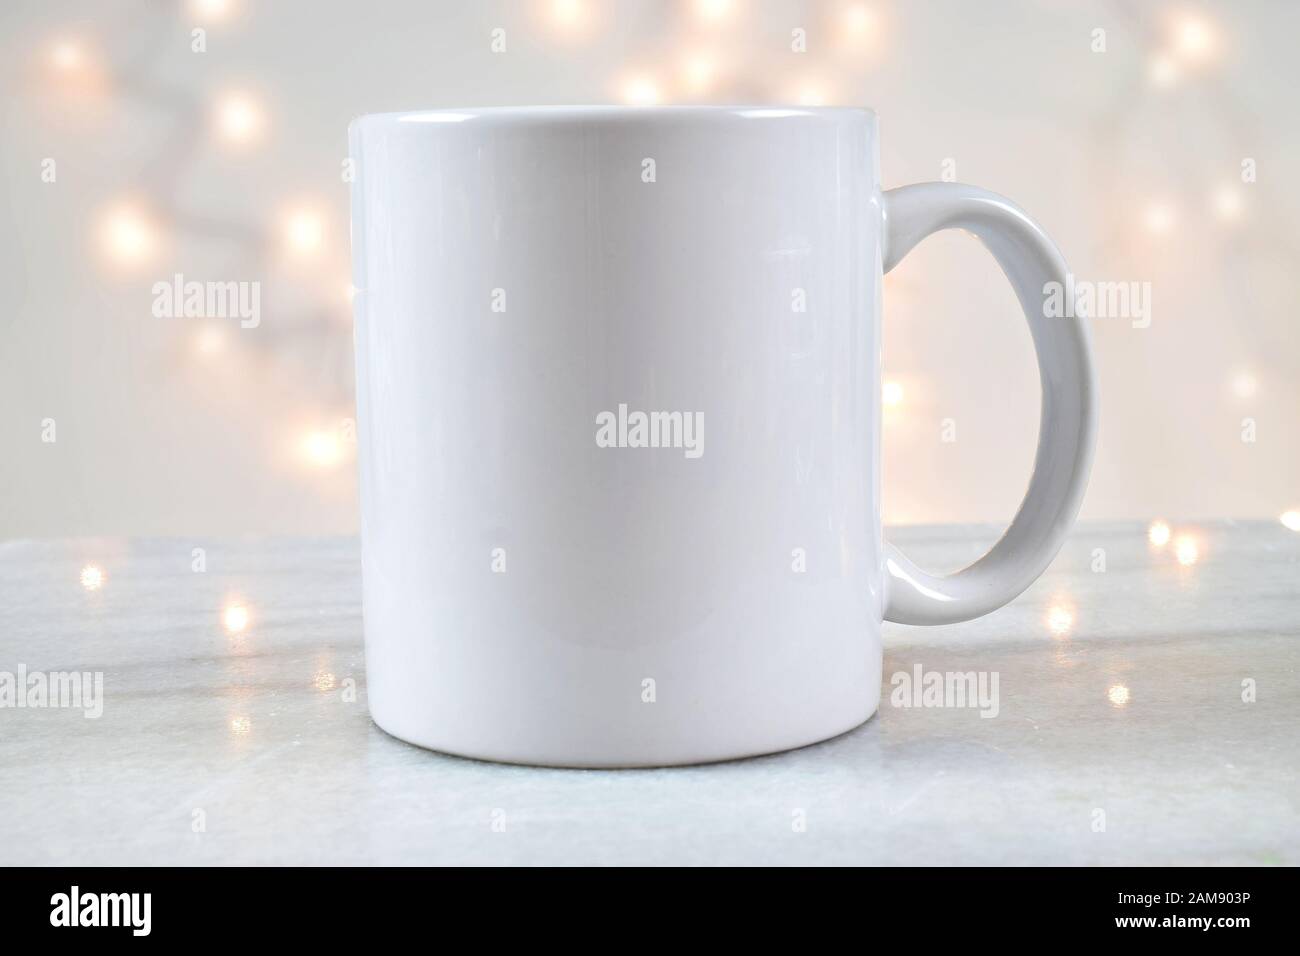 https://c8.alamy.com/comp/2AM903P/an-11-oz-coffee-cup-rests-delightfully-on-a-marble-background-with-glowing-white-christmas-lights-in-the-background-add-your-own-design-to-the-mug-2AM903P.jpg